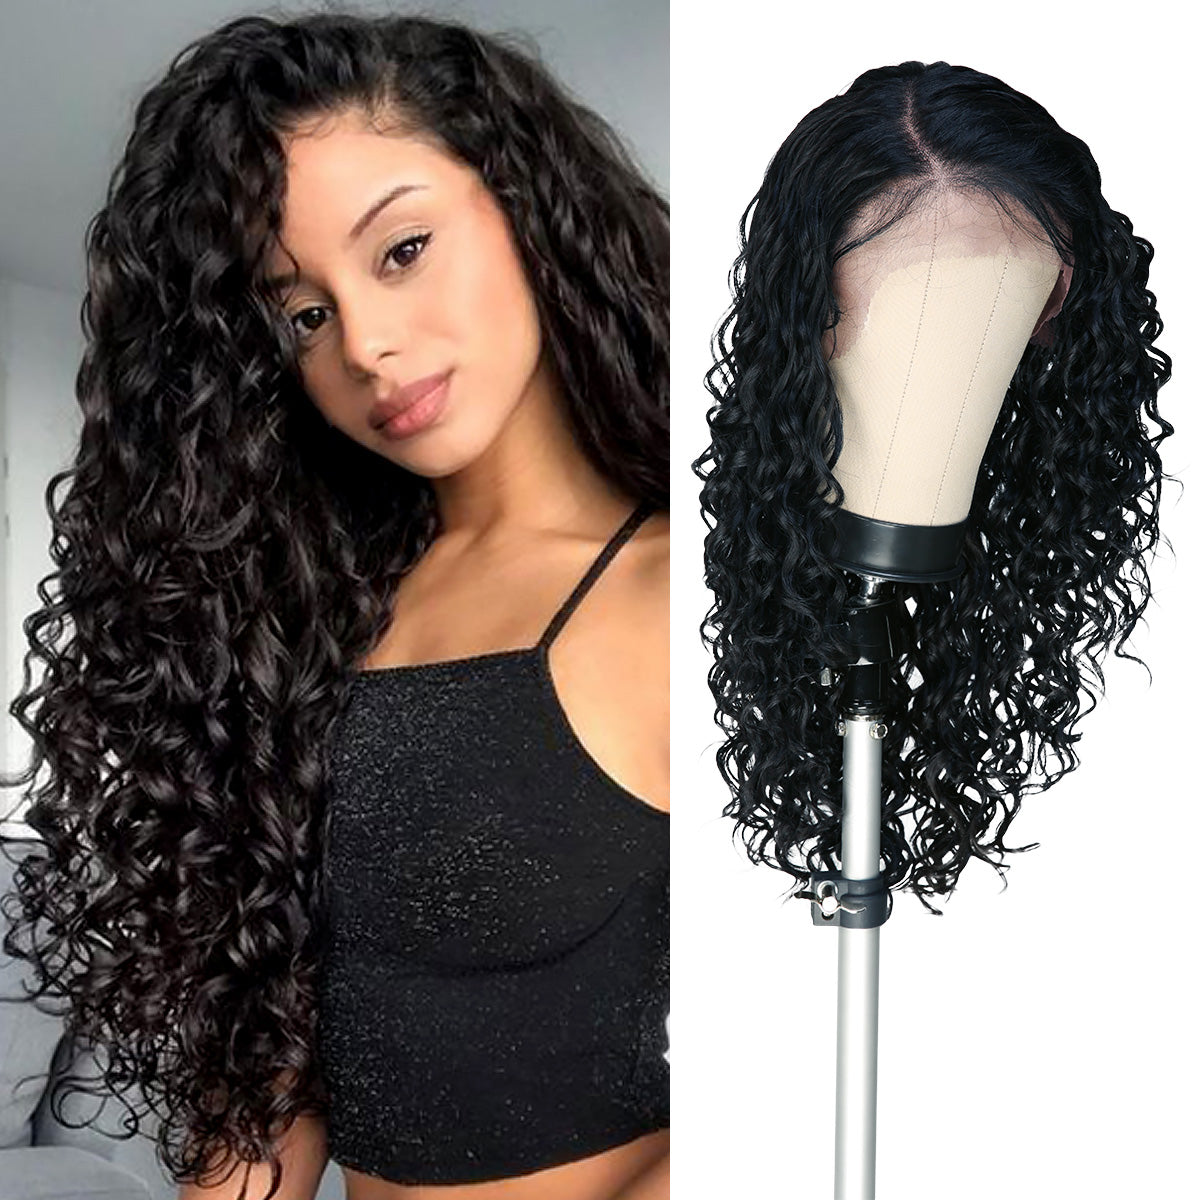 13c6 lace frontal wig with tight curl, best selling curly wig, long curly wig, invisible lace wigMulti-Parting, 13X6, Human Hair Blend, Frontal Wig, Invisible Lace, Pre-Plucked, Curly Wig, Rodded Curls, Ringlet Curl Pattern, Layered Curly Wig, Volume Wigs,